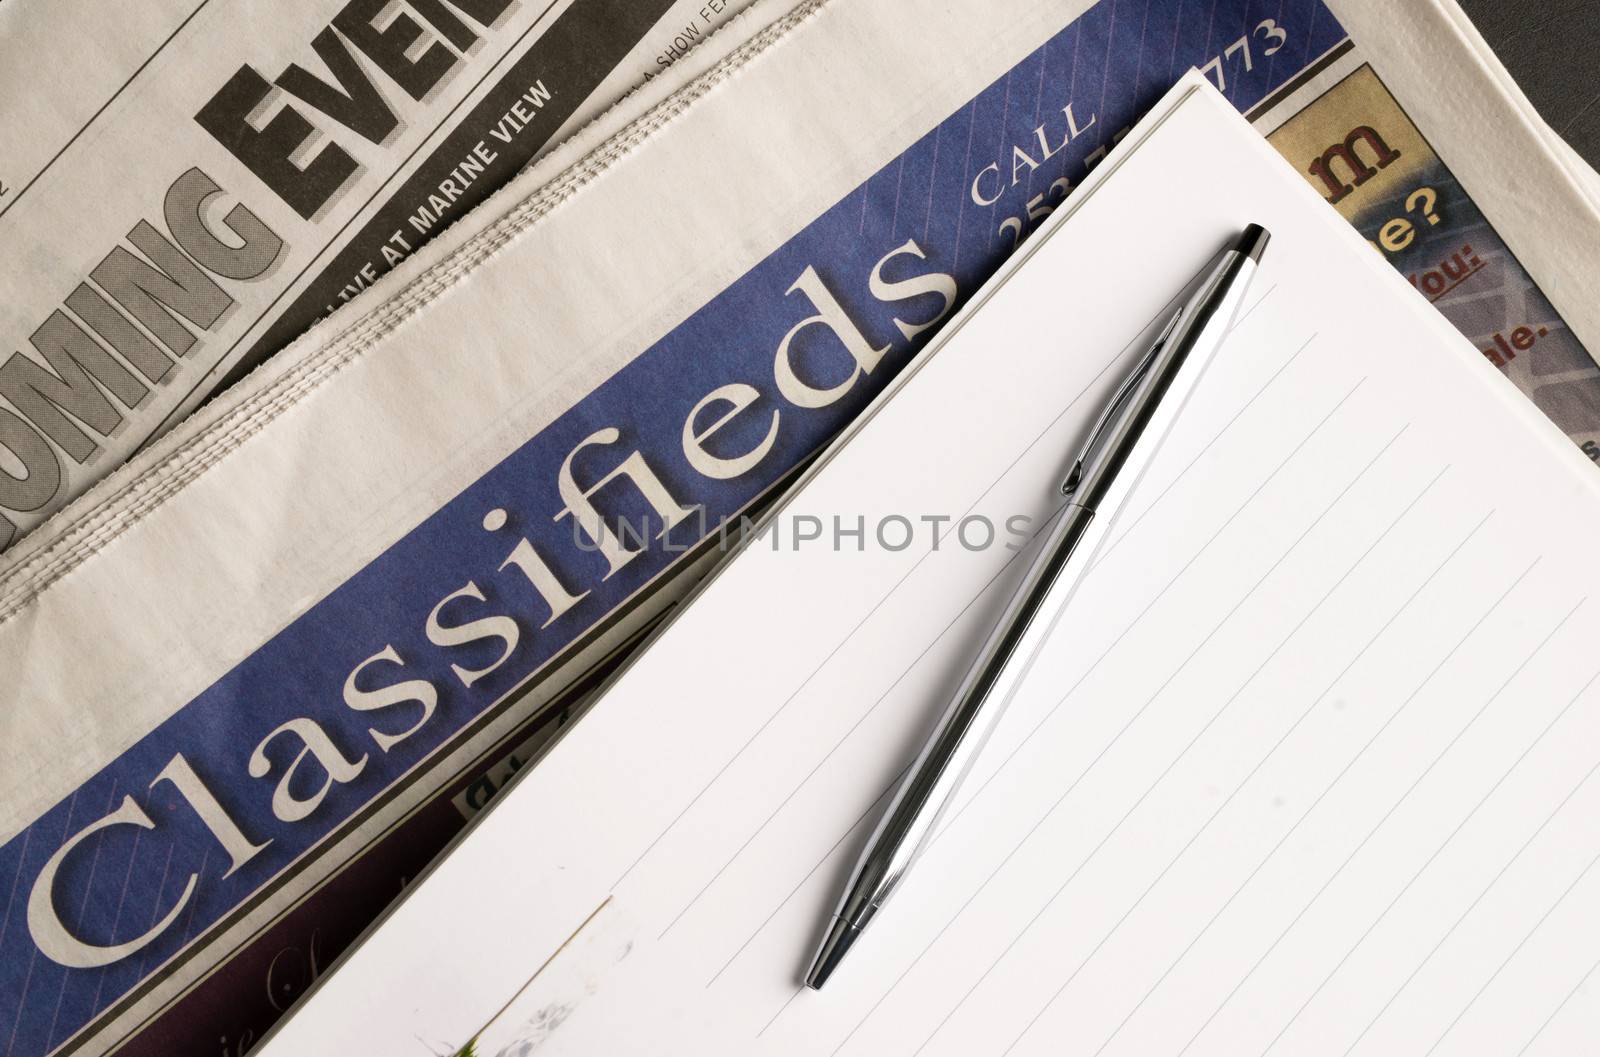 Local Newspaper Coming Events Classified Ads Pen Paper Job Hunting by ChrisBoswell